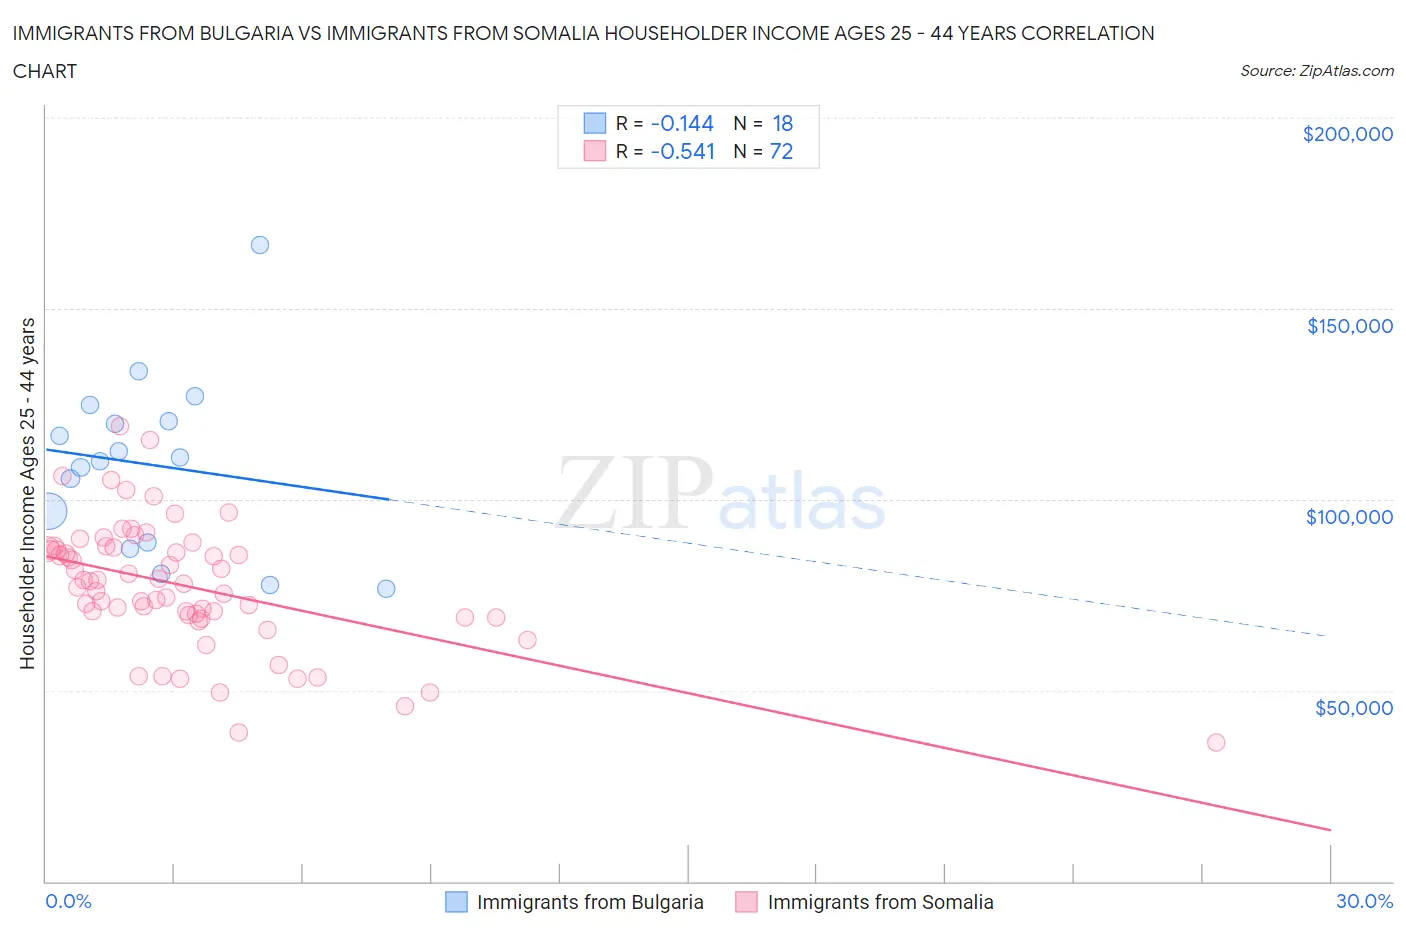 Immigrants from Bulgaria vs Immigrants from Somalia Householder Income Ages 25 - 44 years